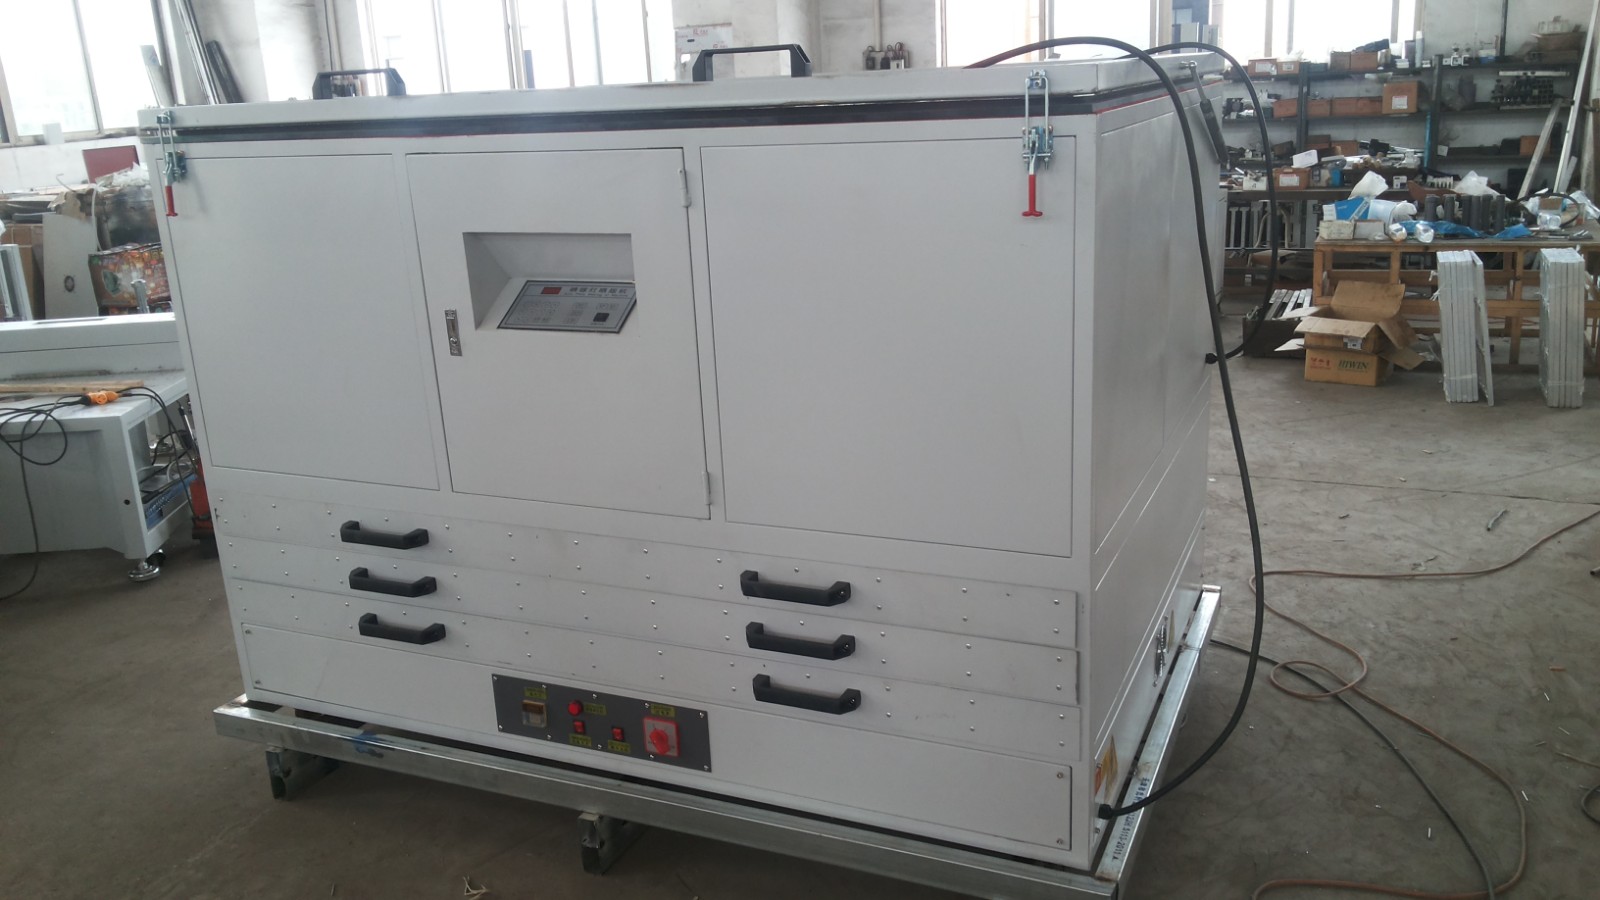 Drying cabinet with exposure machine for screen